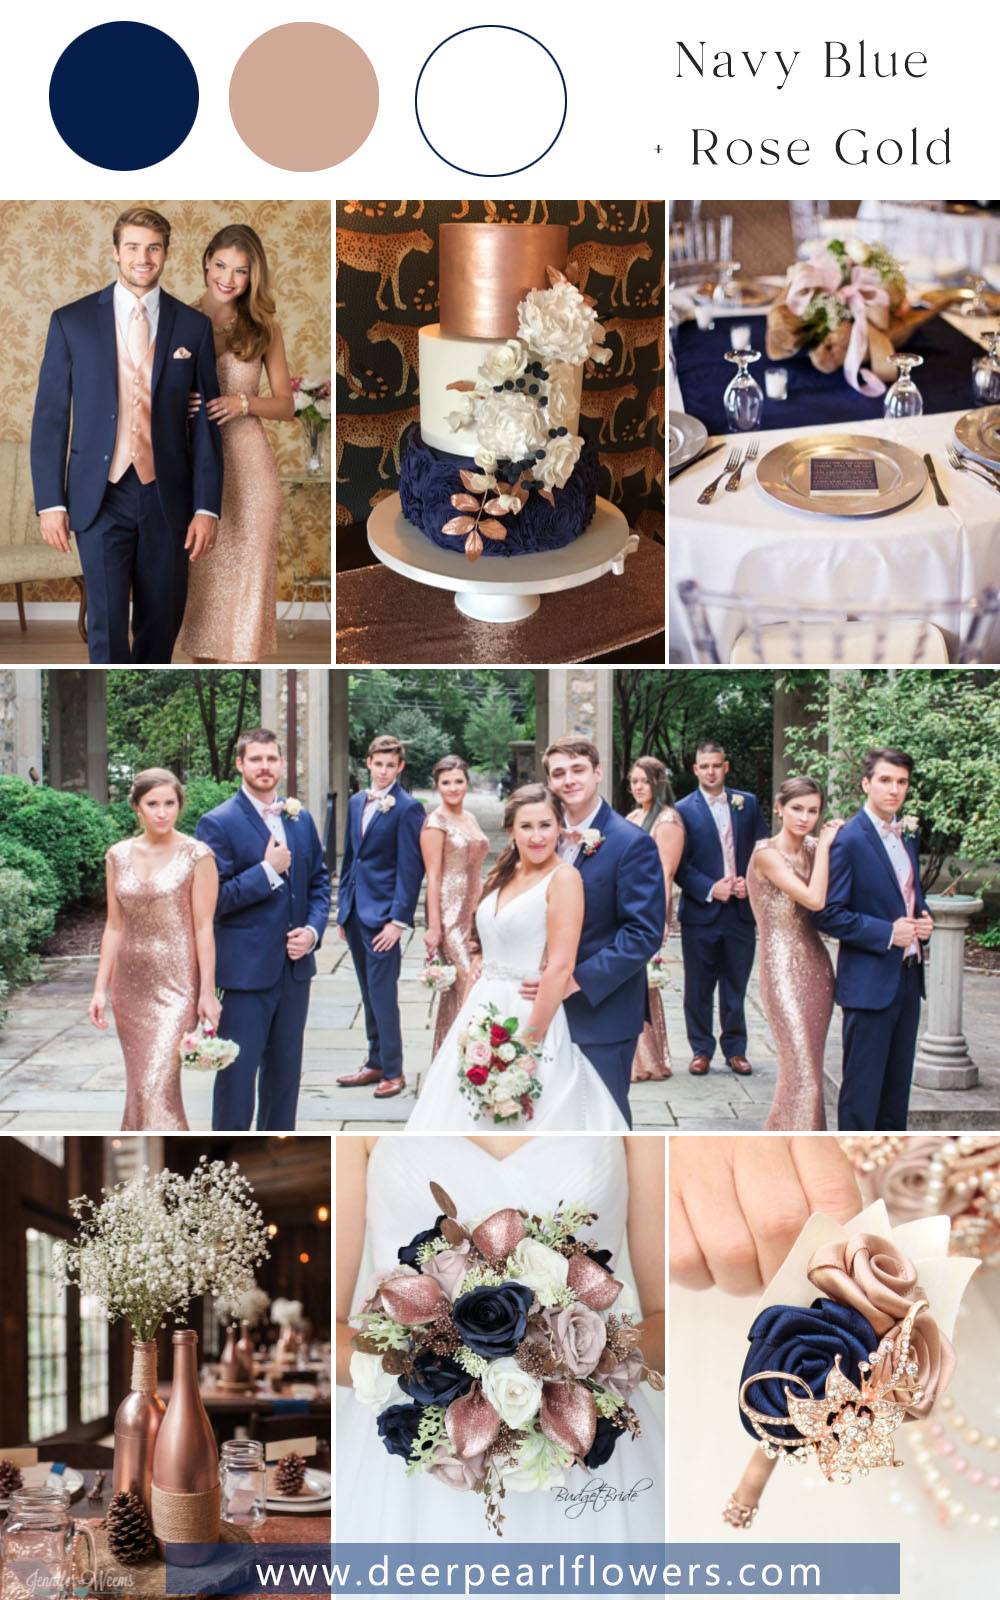 Top 10 Rose Gold and Navy Blue Wedding Theme Ideas